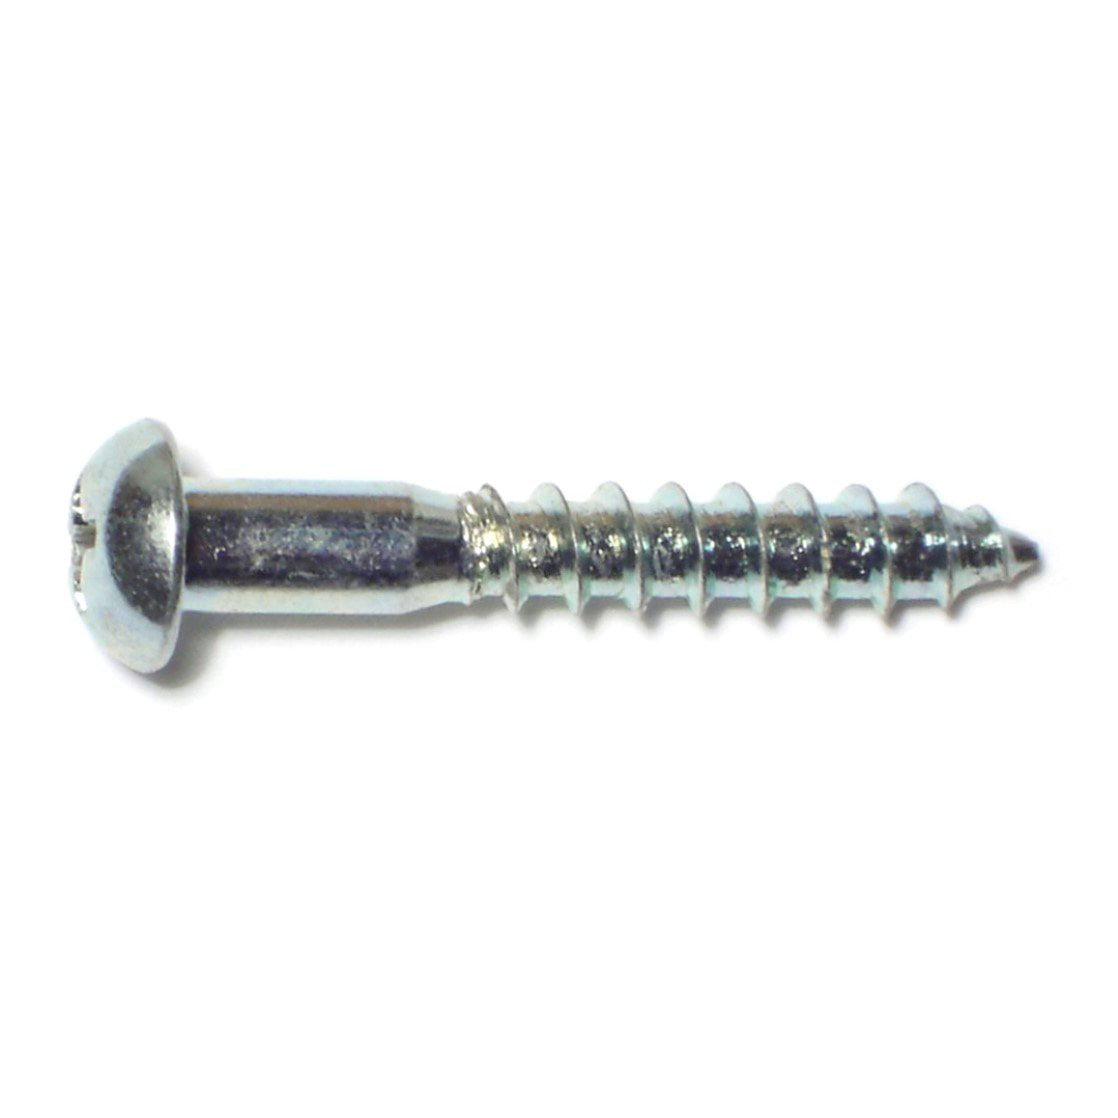 #10 x 3" Round Head Wood Screws Slotted Drive Stainless Steel Quantity 25 